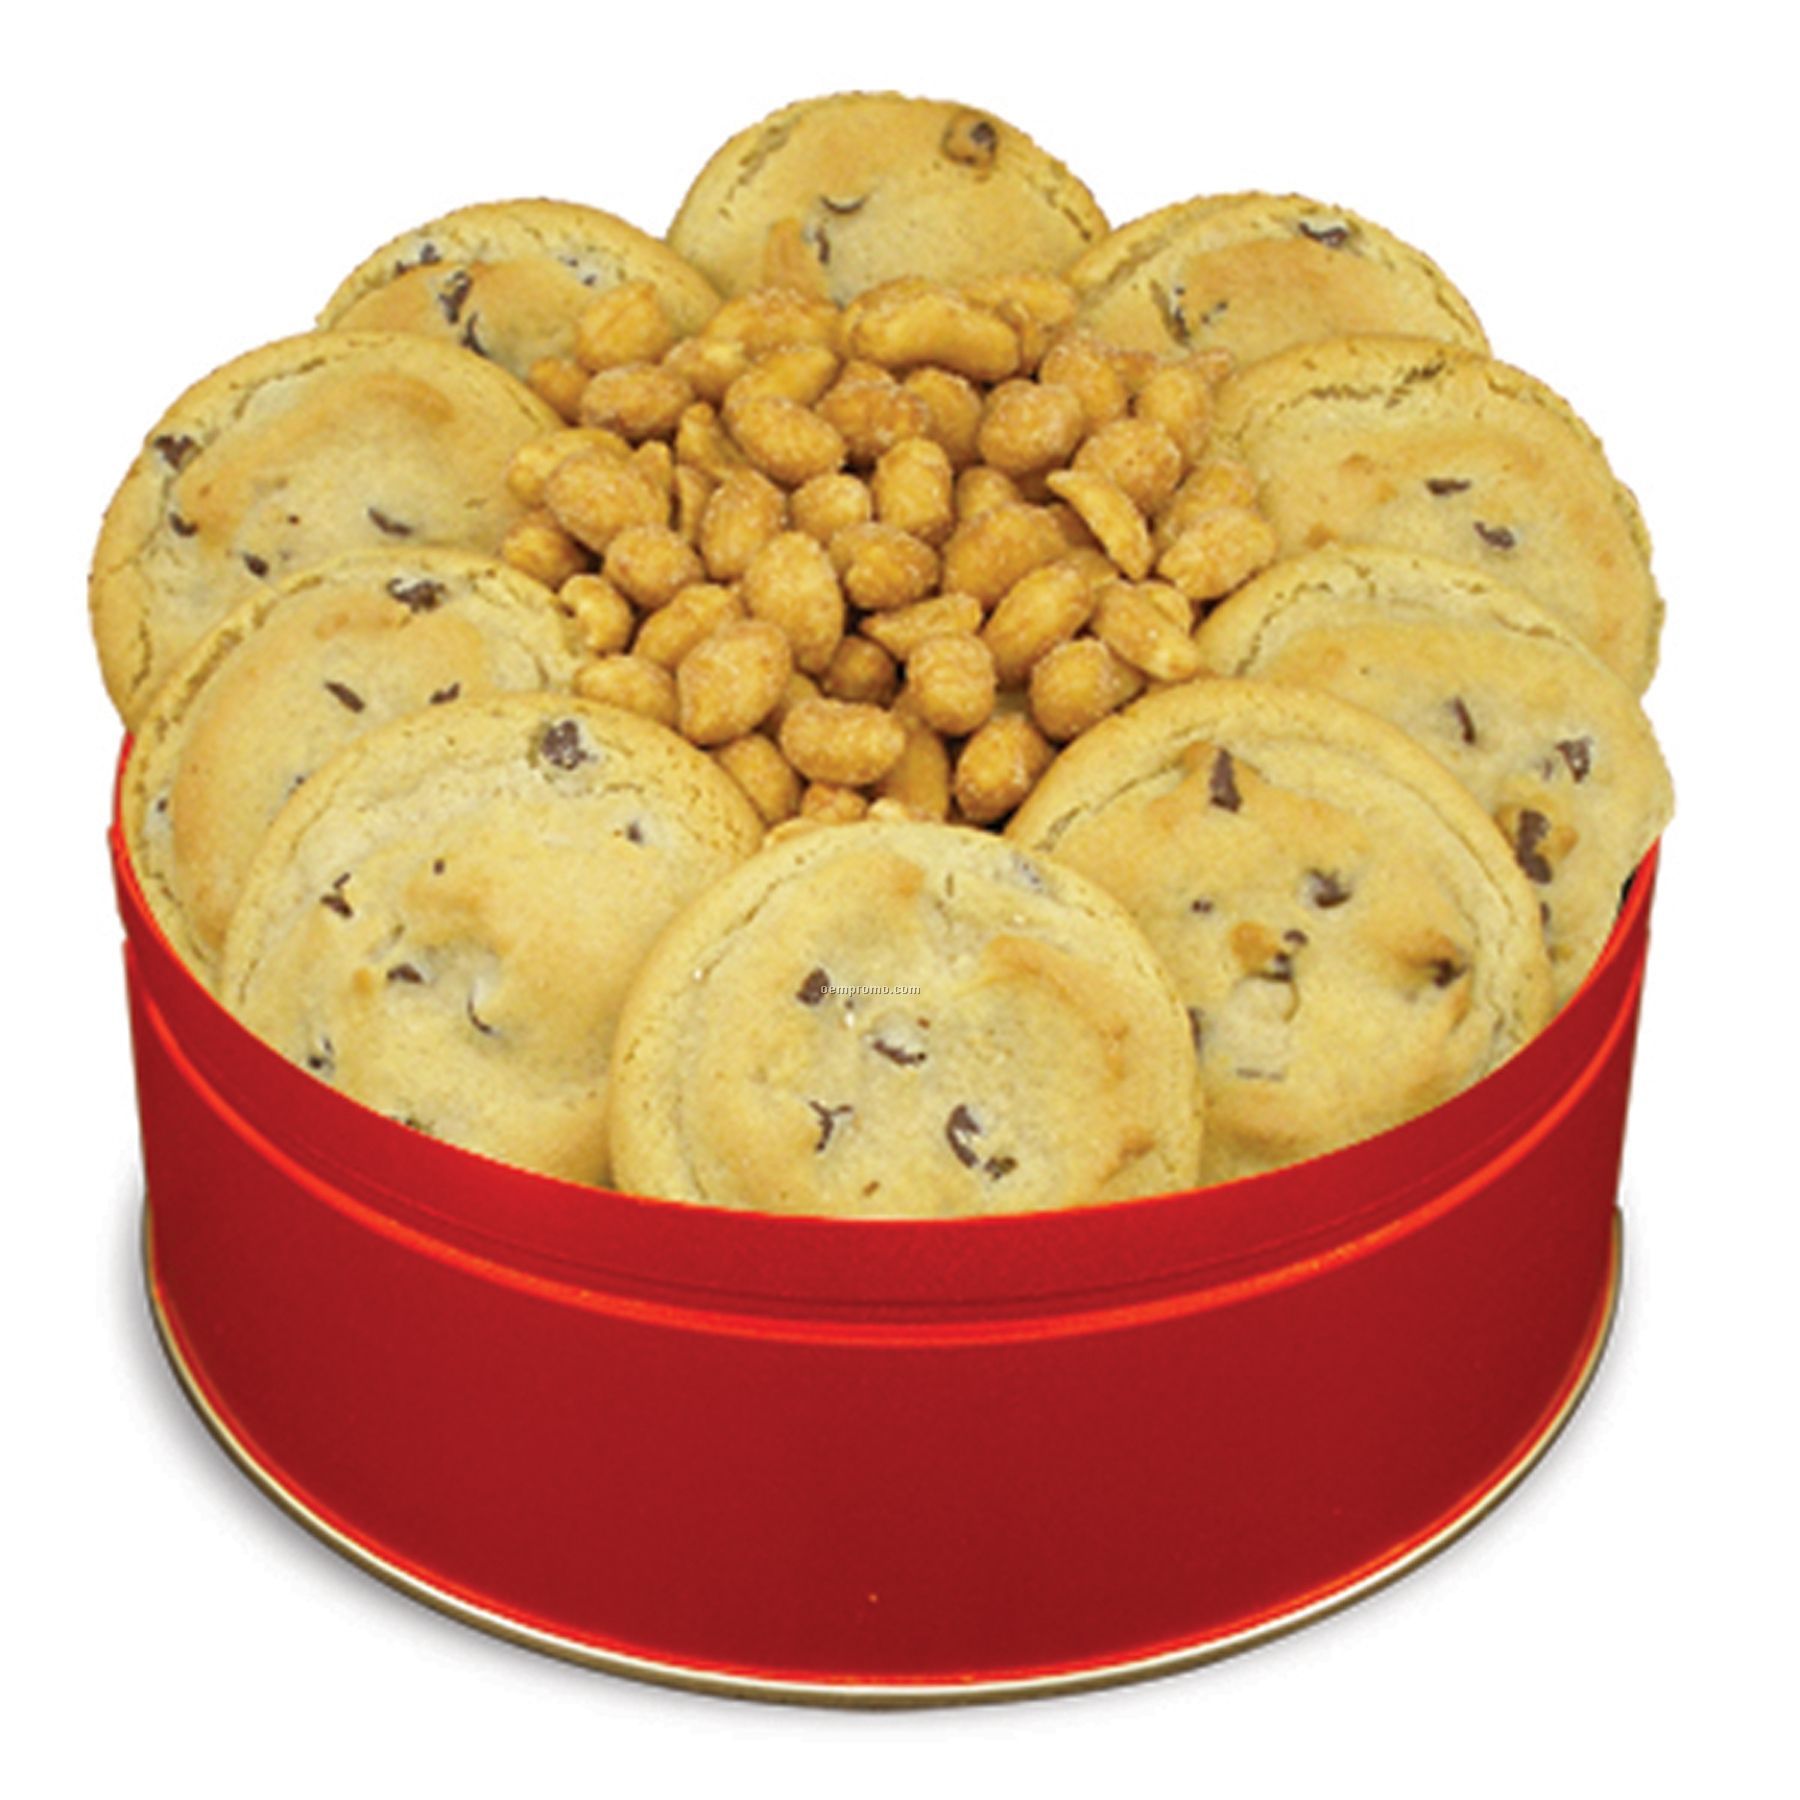 Cookie Nut Combos - 10 Chocolate Chip Cookies & Roasted Peanuts (10 Oz.)